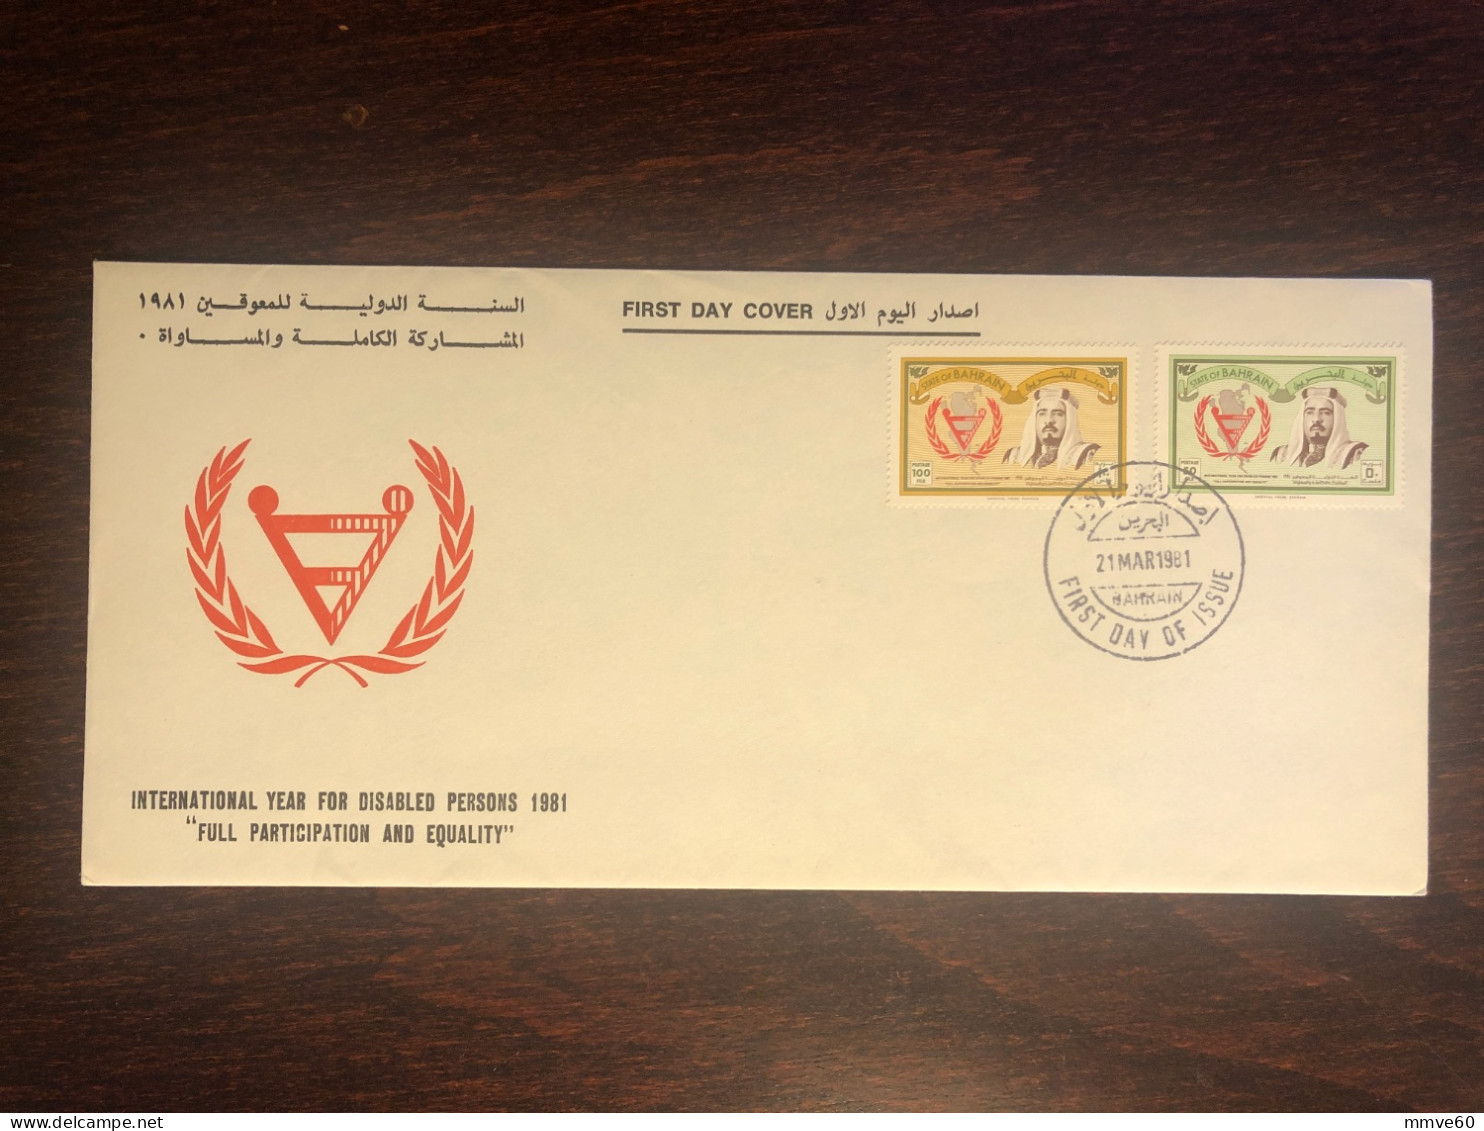 BAHRAIN FDC COVER 1981 YEAR DISABLED PEOPLE HEALTH MEDICINE STAMPS - Bahrain (1965-...)